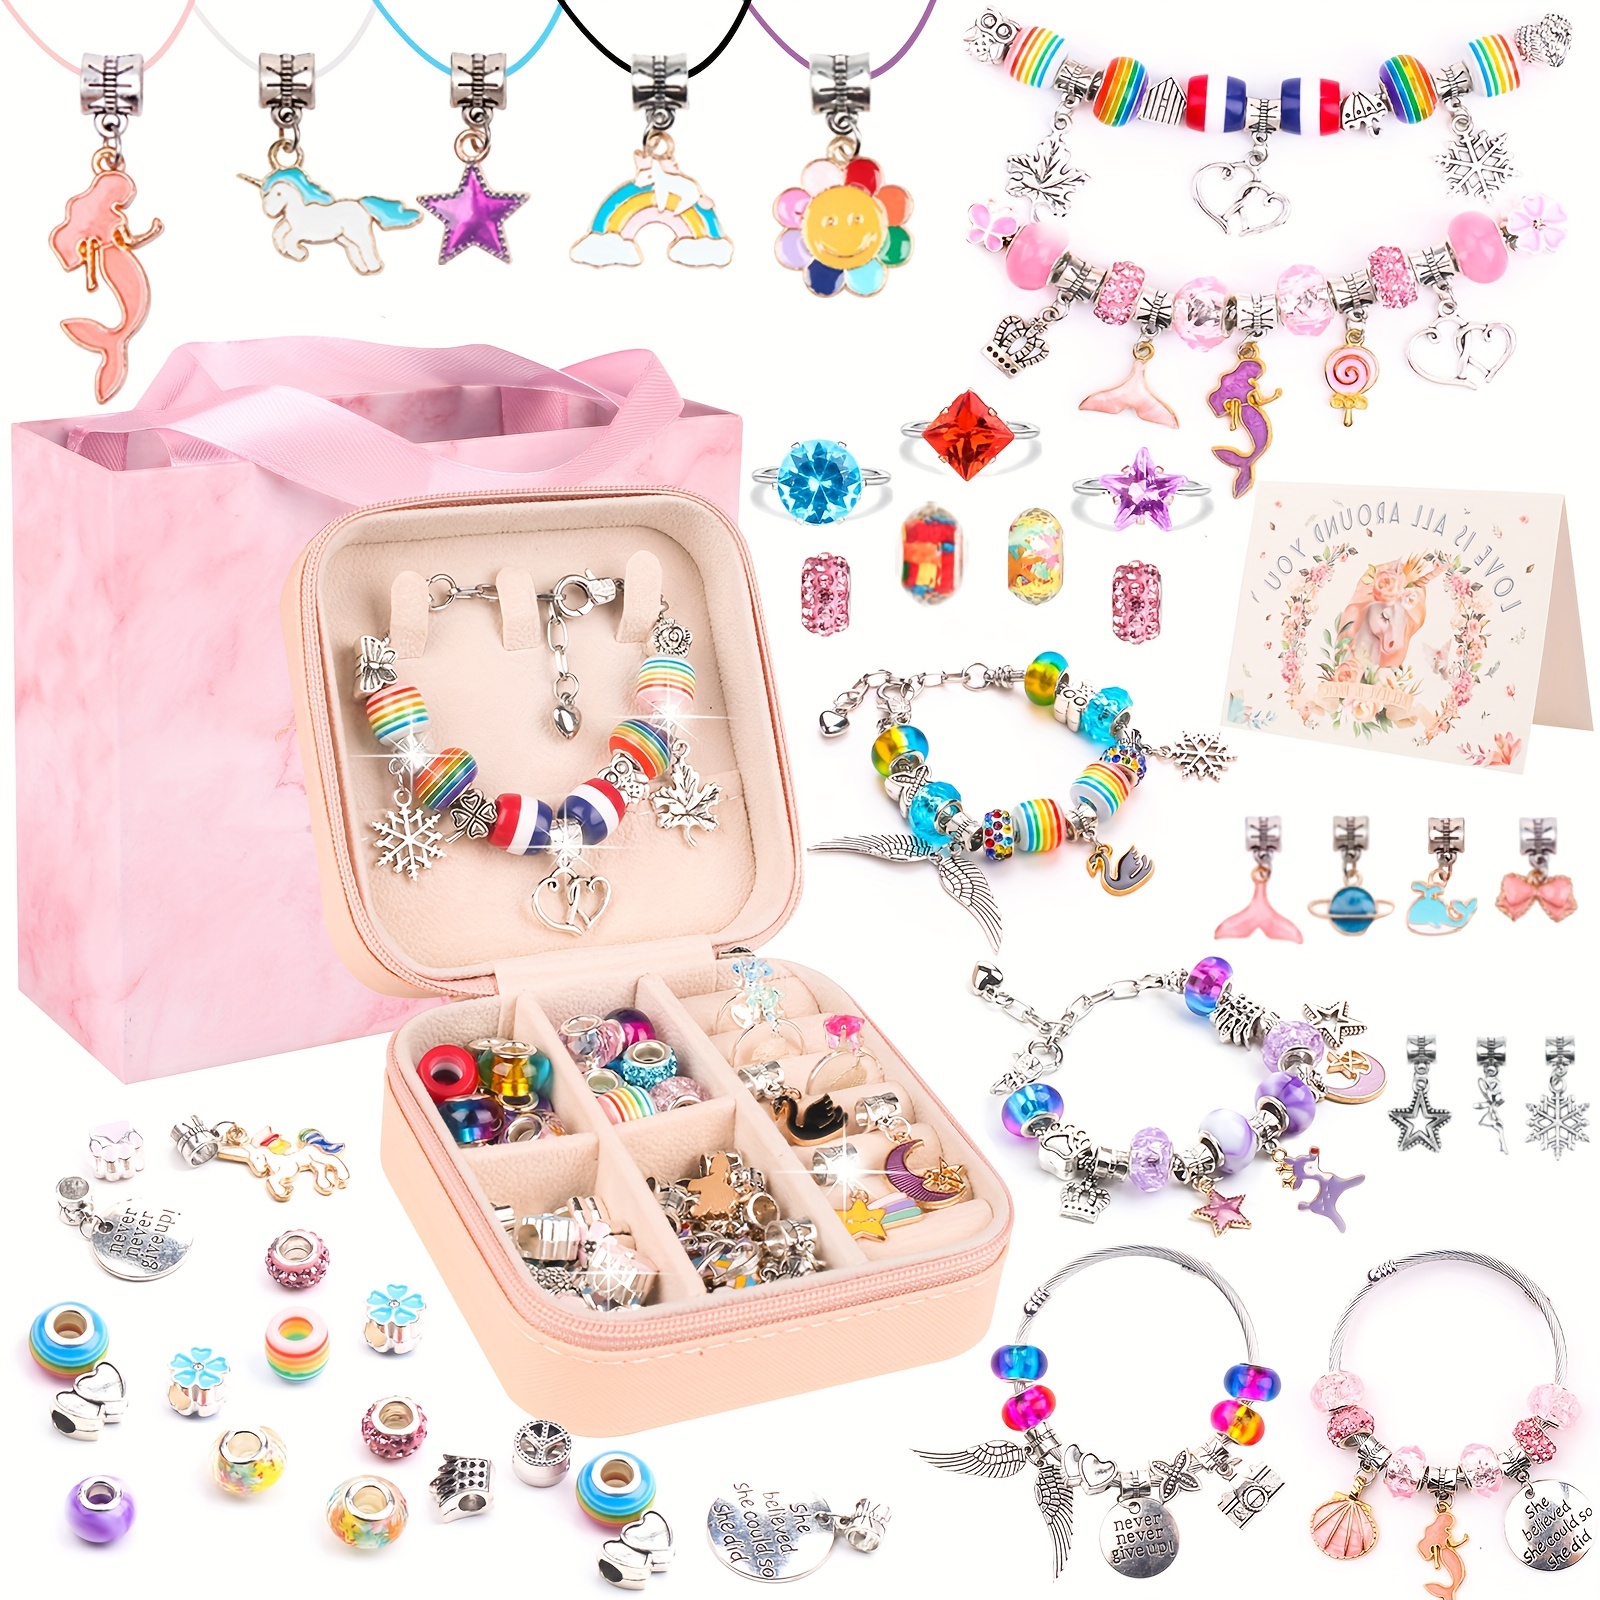 MONOBIN Charm Bracelet Making Kit for Girls, 130 Pieces Jewelry Making  Supplies, Charm Beads for Jewelry Bracelets DIY Craft Kit - Gifts Idea for  Teen